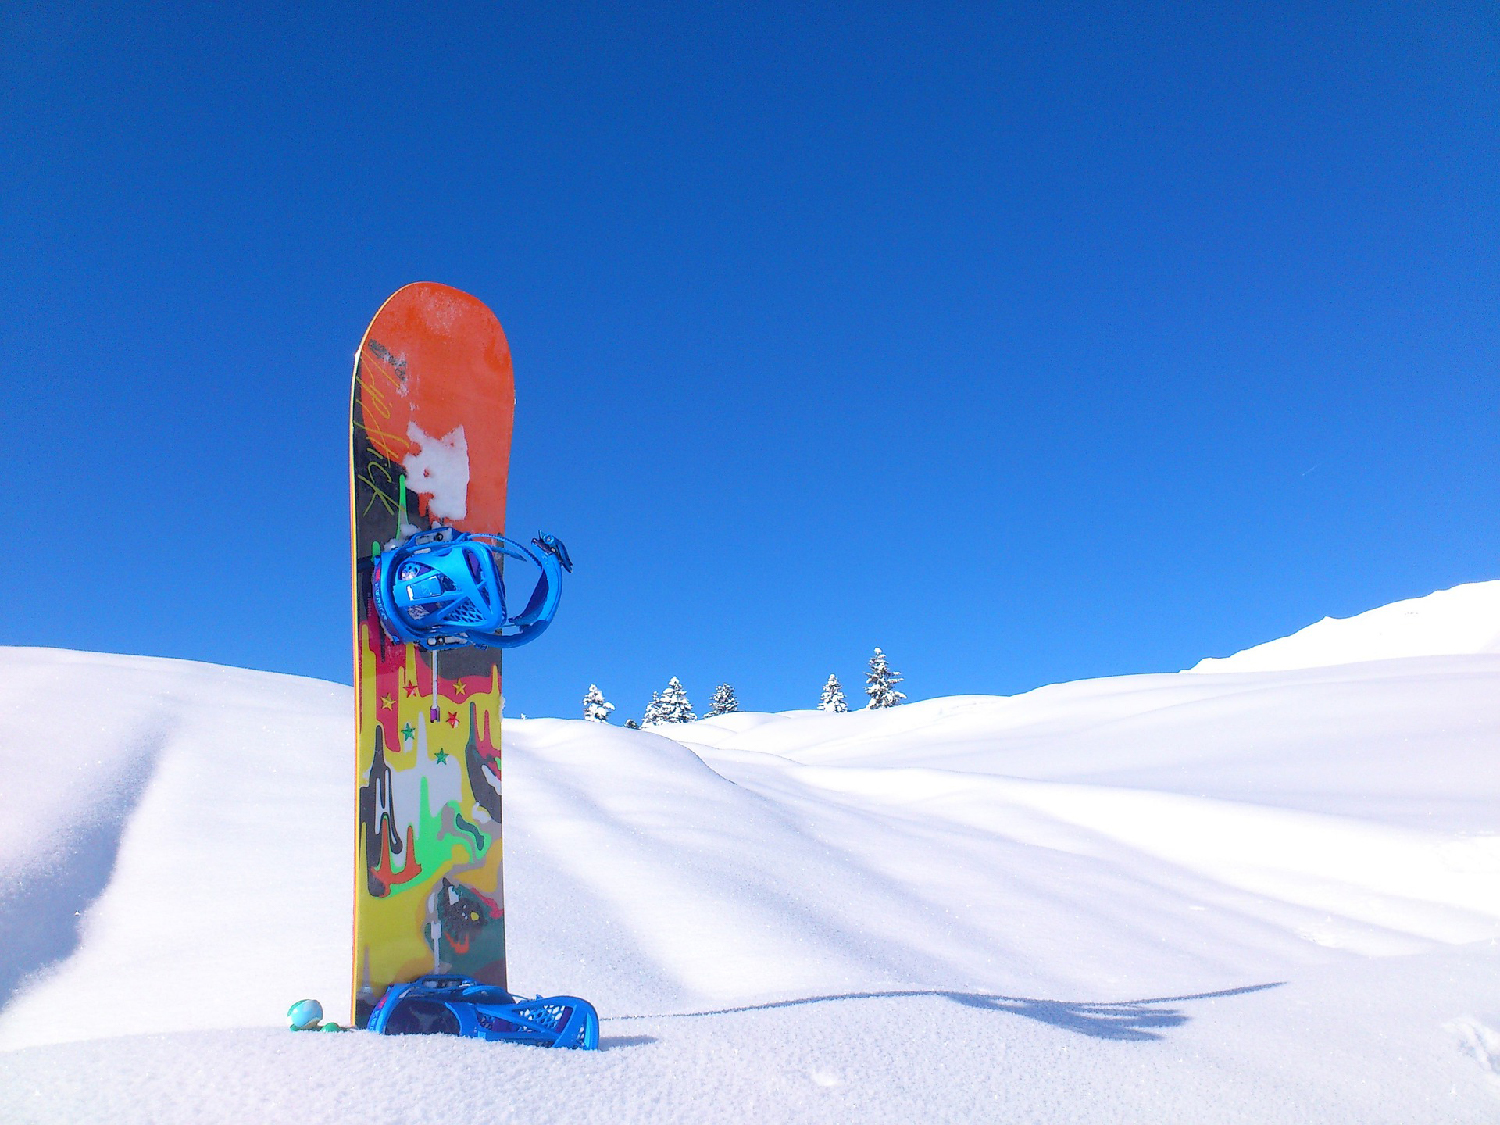 vermont snowboard sticking out of snow on a clear day. photo from pixabay by spinheike